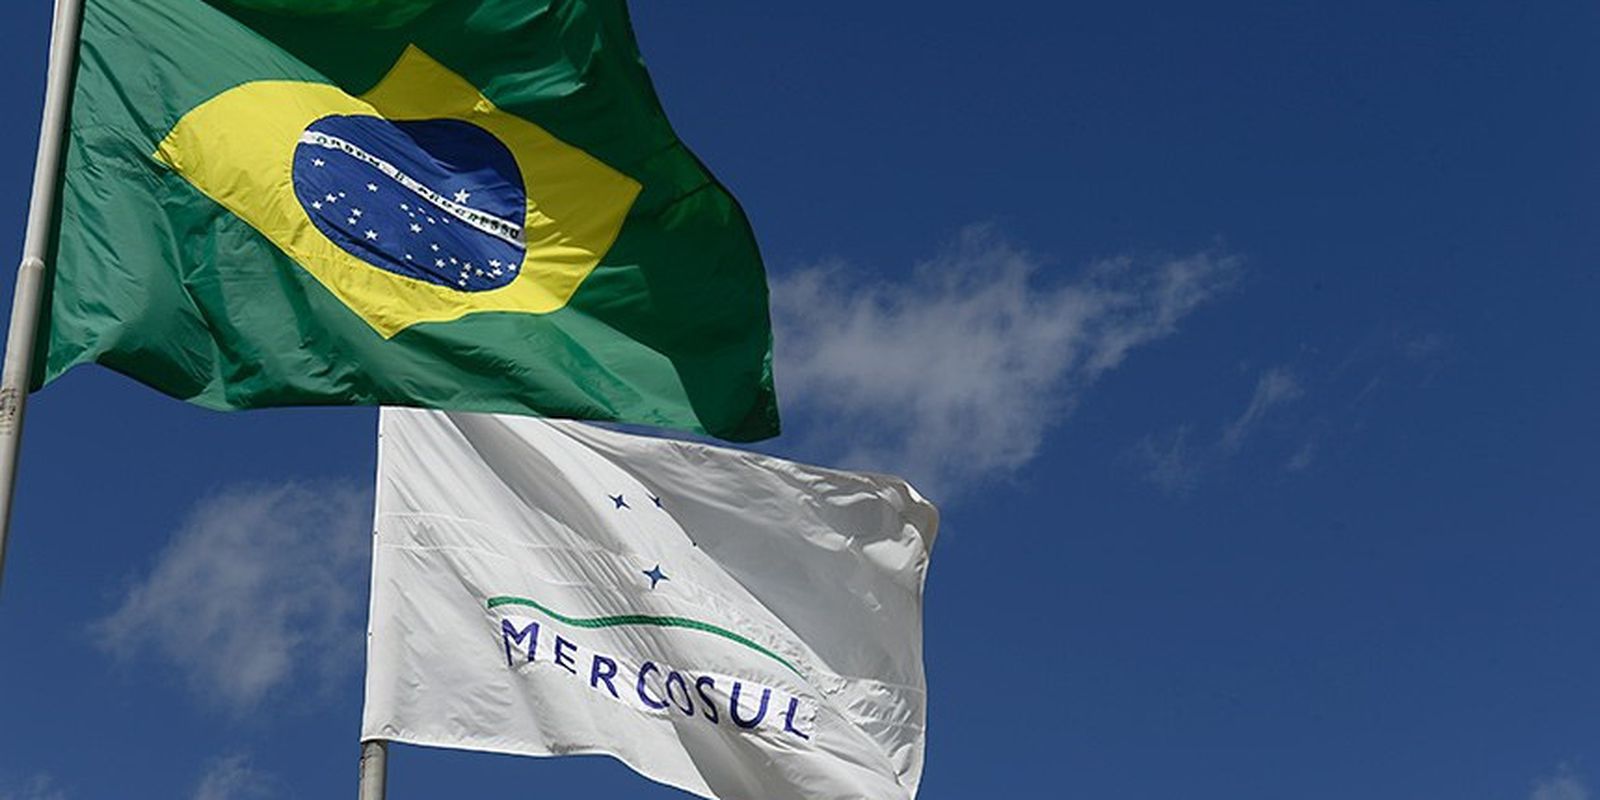 Camex makes a definitive 10% cut in the Mercosur common tariff